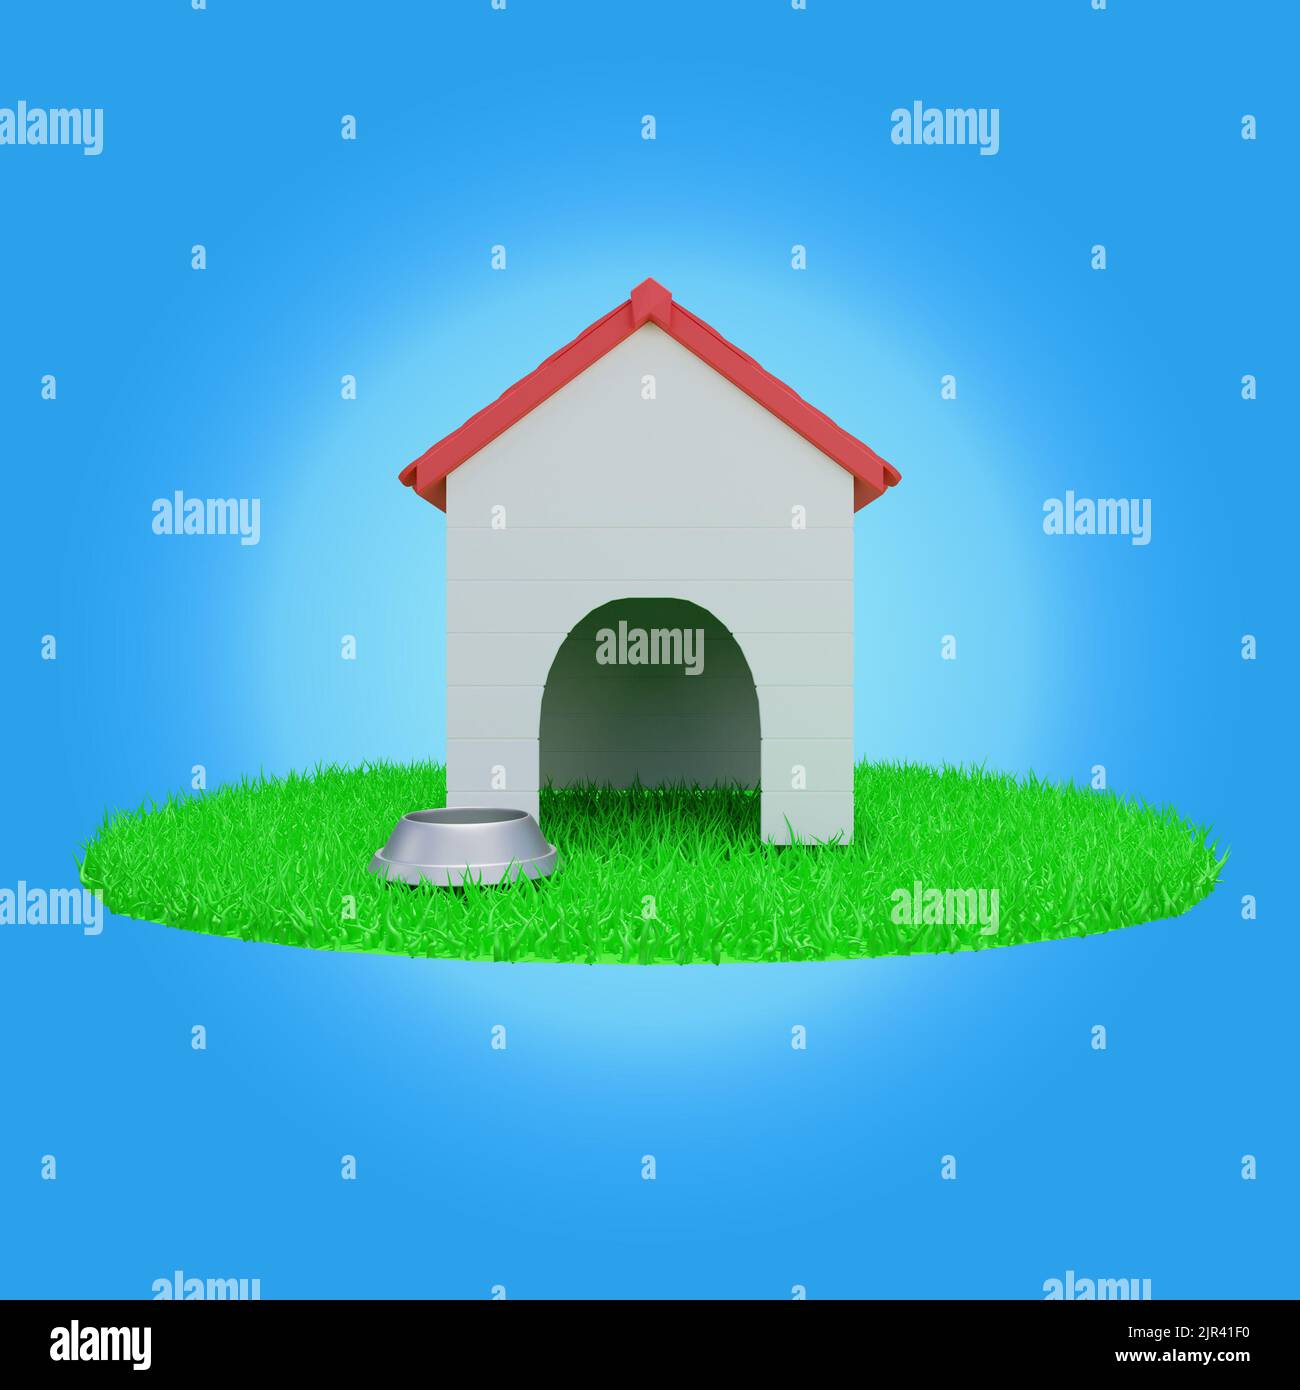 3d rendering of a dog house in the grass Stock Photo